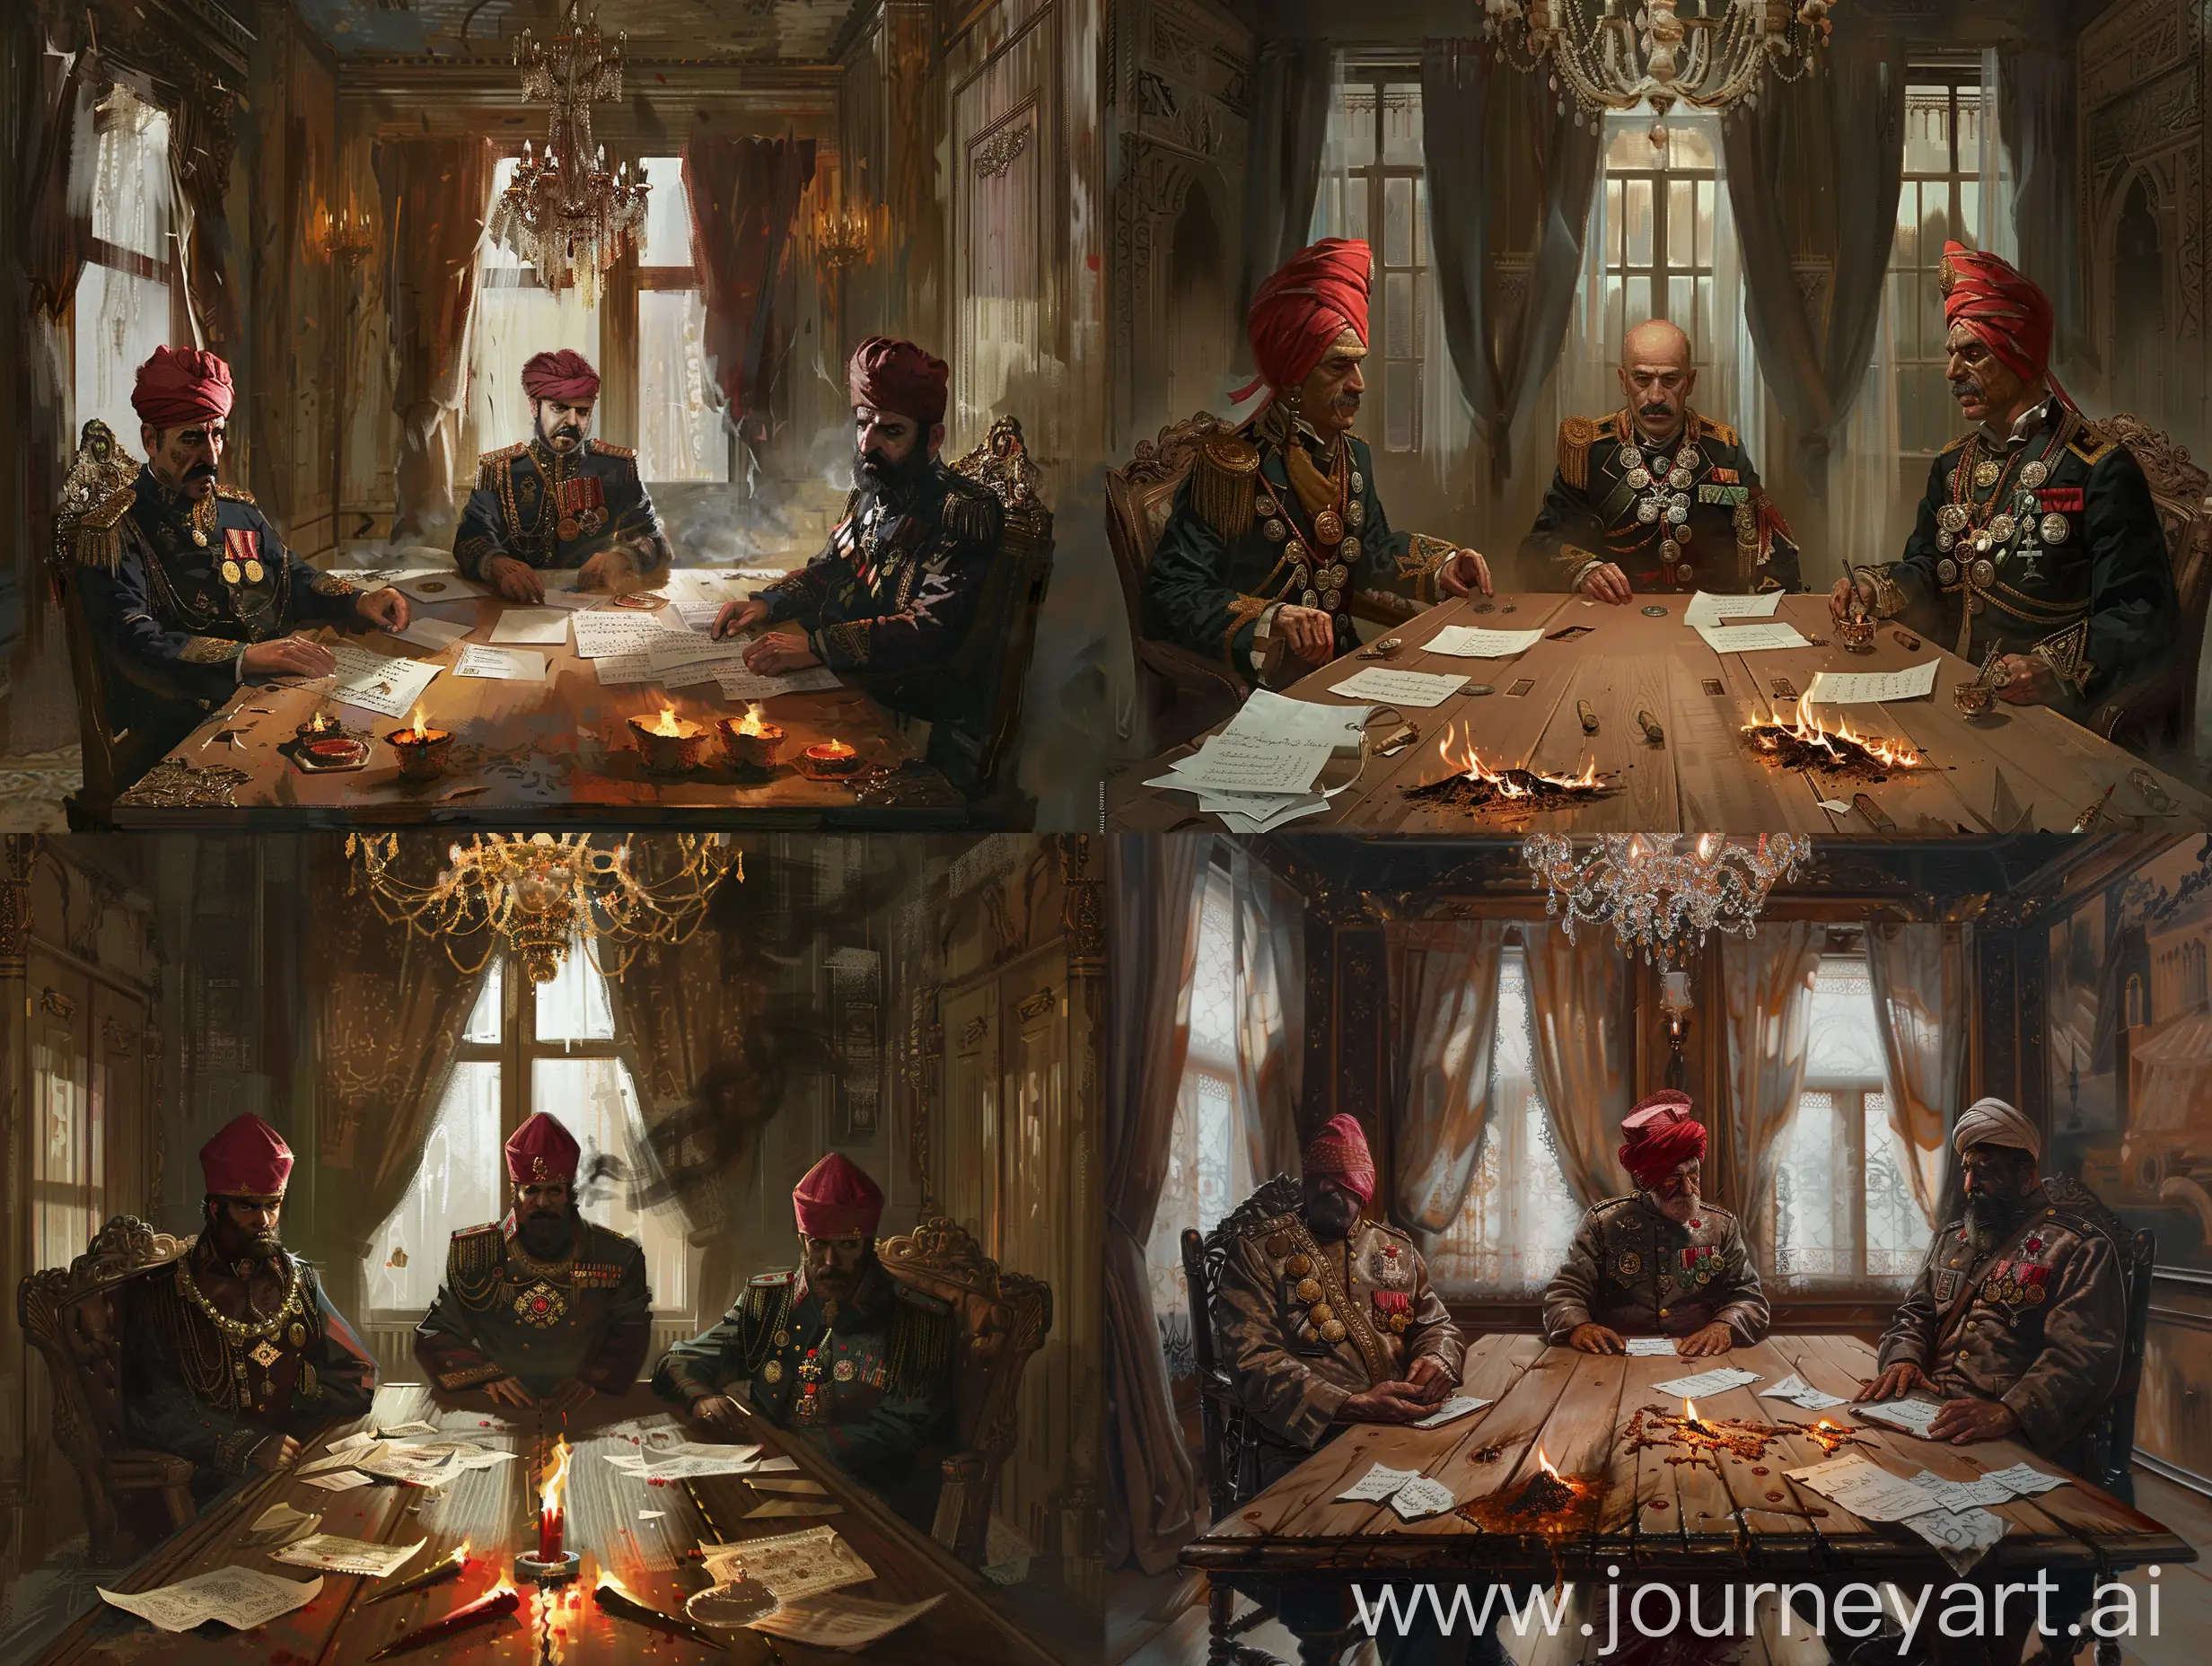 In this painting, there are three Ottoman Pashas. (Enver Pasha, Talat Pasha and Cemal Pasha.) Their heads are covered with a red fez. The three men are sitting around a wooden table. They are all dressed in Ottoman military uniforms and wearing Ottoman medals and insignia. The room is ornately decorated; a chandelier hangs above the ceiling and the windows have elegant curtains. Papers and burnt candles are scattered on the table, adding a mood to the scene. The lighting is dramatic, creating shadows and emphasizing the people and objects in the room.